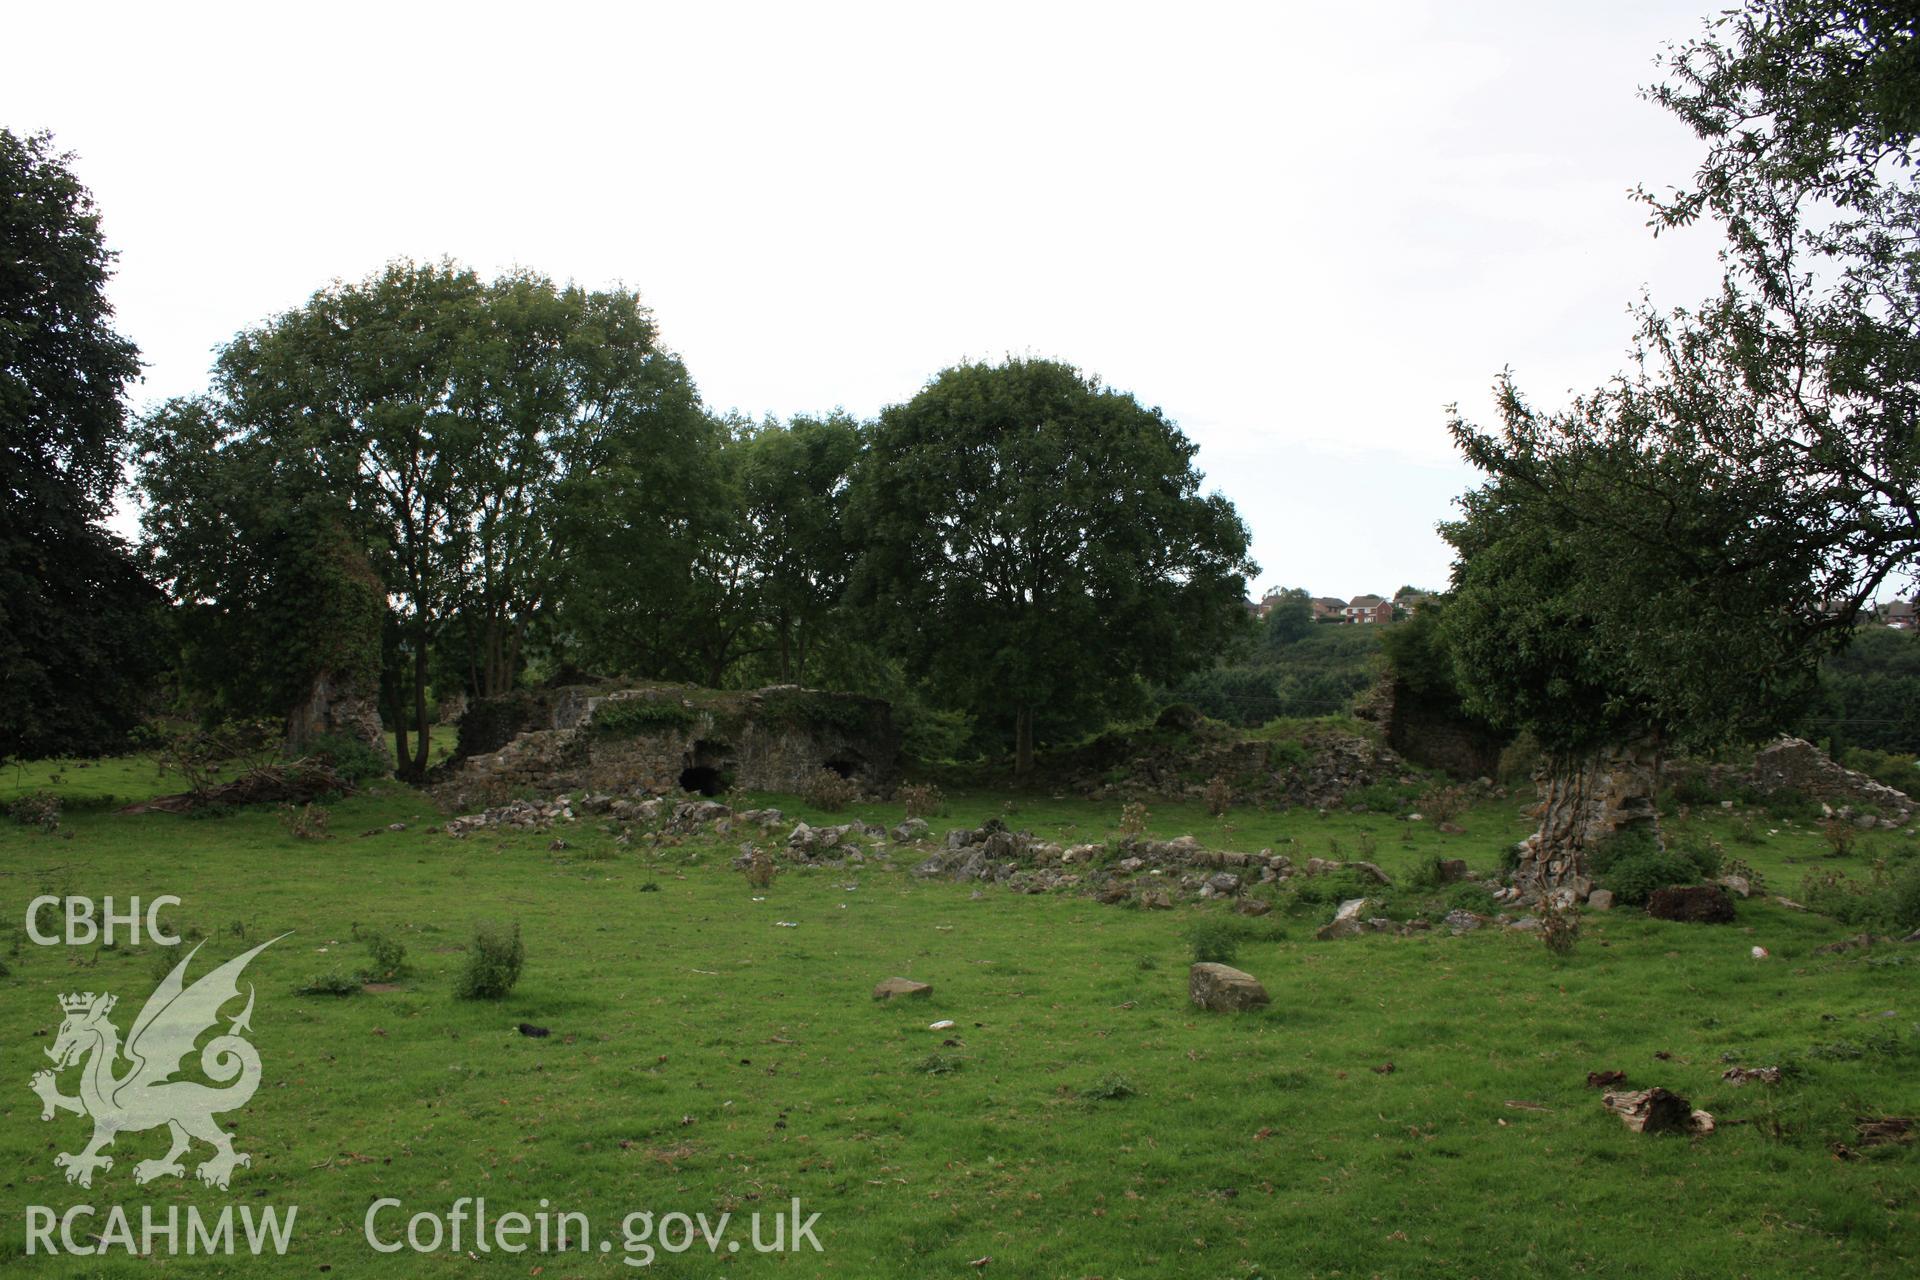 Looking north-west, this photograph shows the remains of the early hall, with later southern extensions and inner courtyard wall to wards the front of the image.